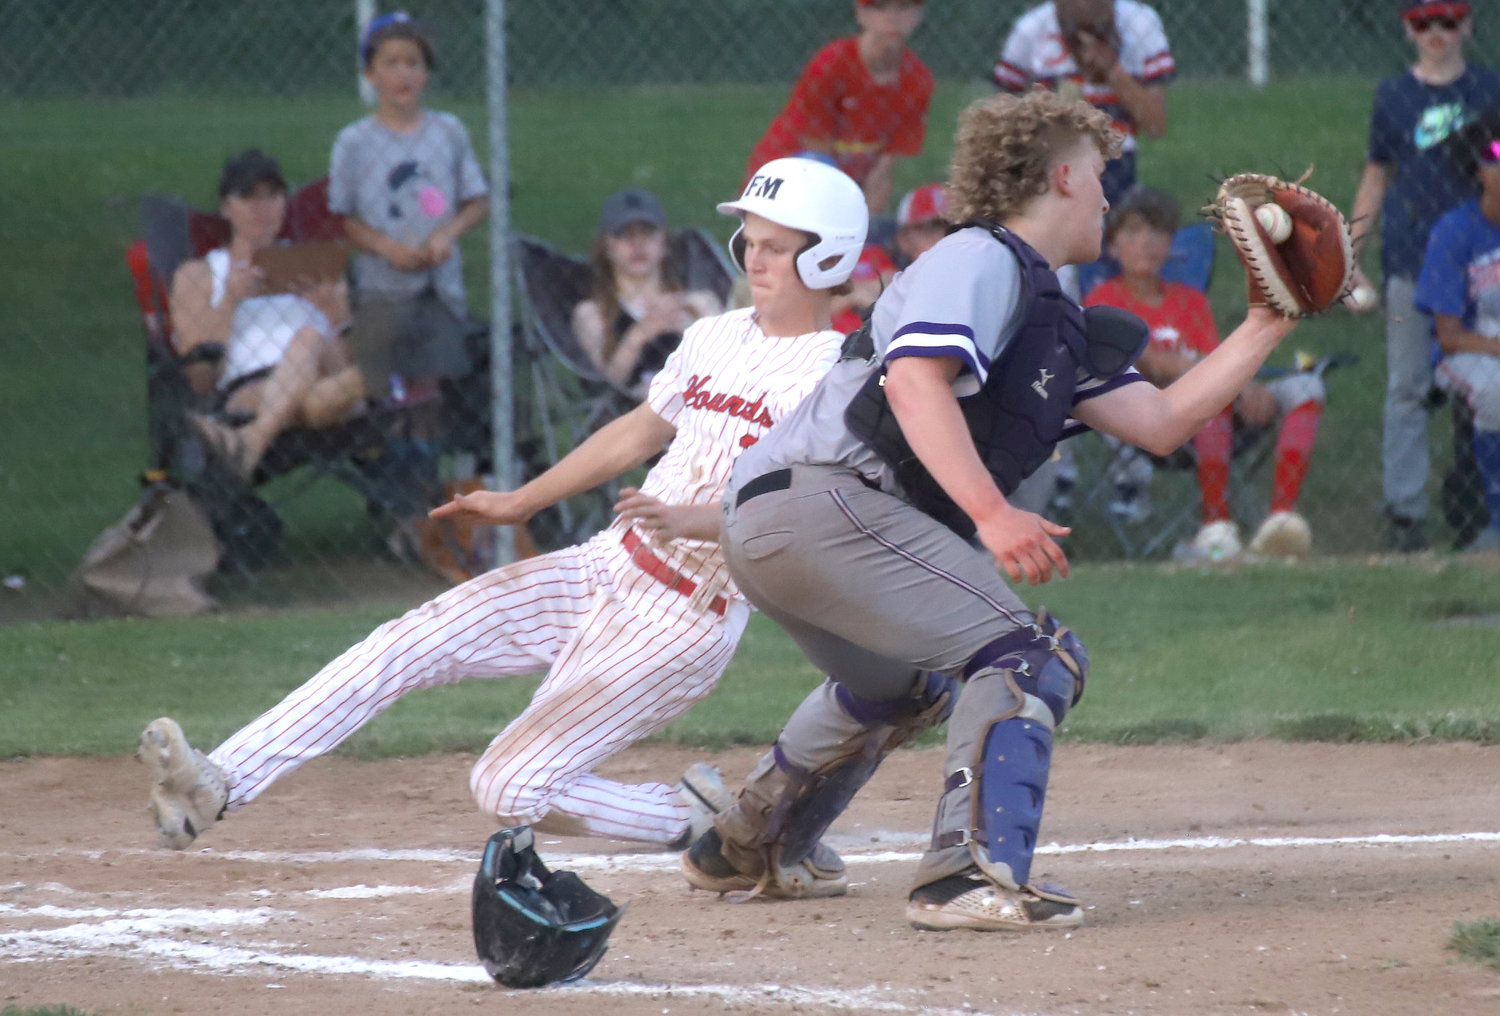 Fort Madison's Reiburn Turnbull slides into home in front of throw to Burlington catcher Tyce Bertlshofer in a 13-2 loss in game 2 of a doubleheader Monday night in Fort Madison. The Bloodhounds won game 1 5-4. Photo by Chuck Vandenberg/PCC